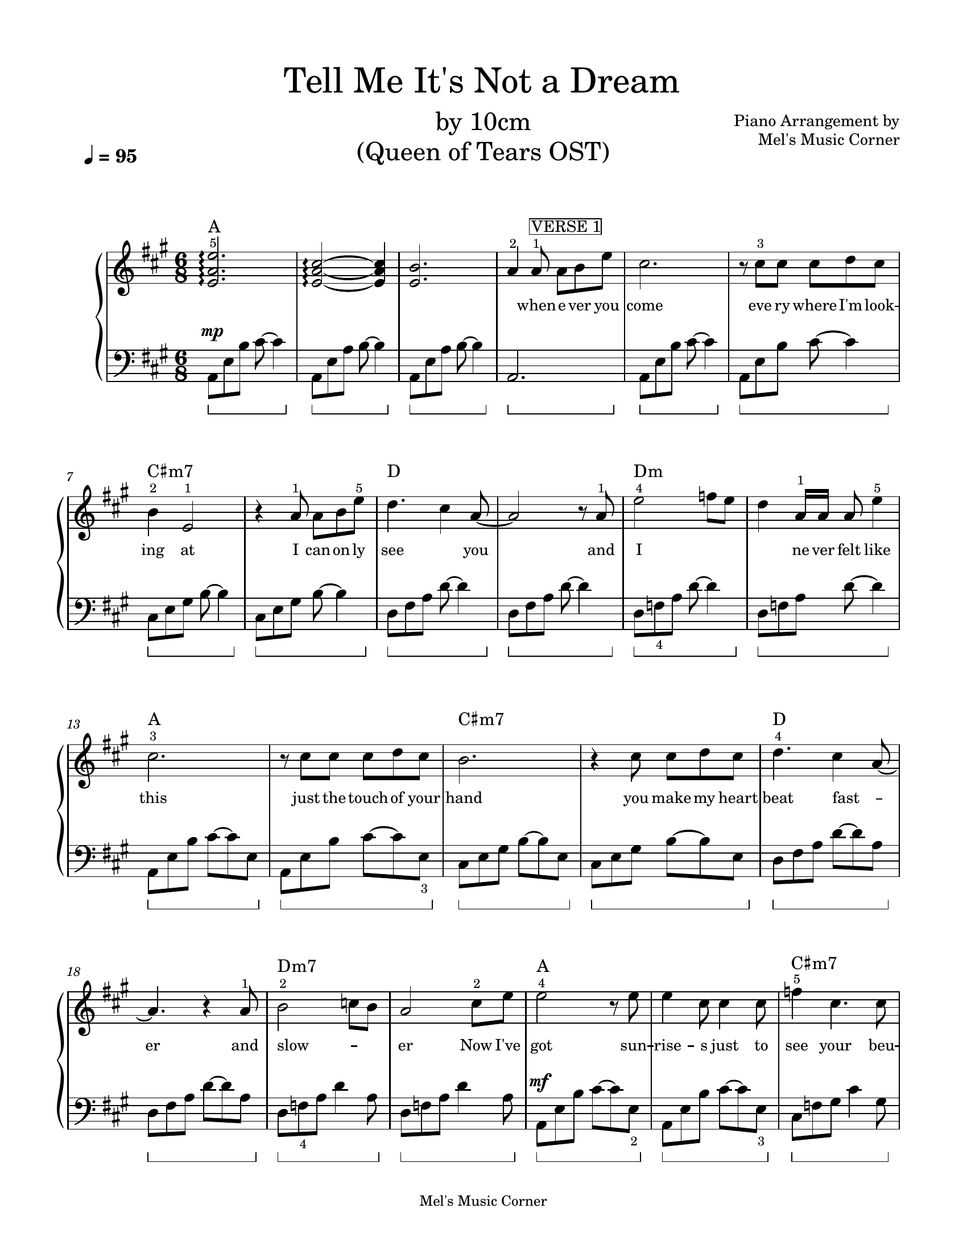 10CM - Tell Me It's Not a Dream (Queen of Tears OST) piano sheet music by Mel's Music Corner